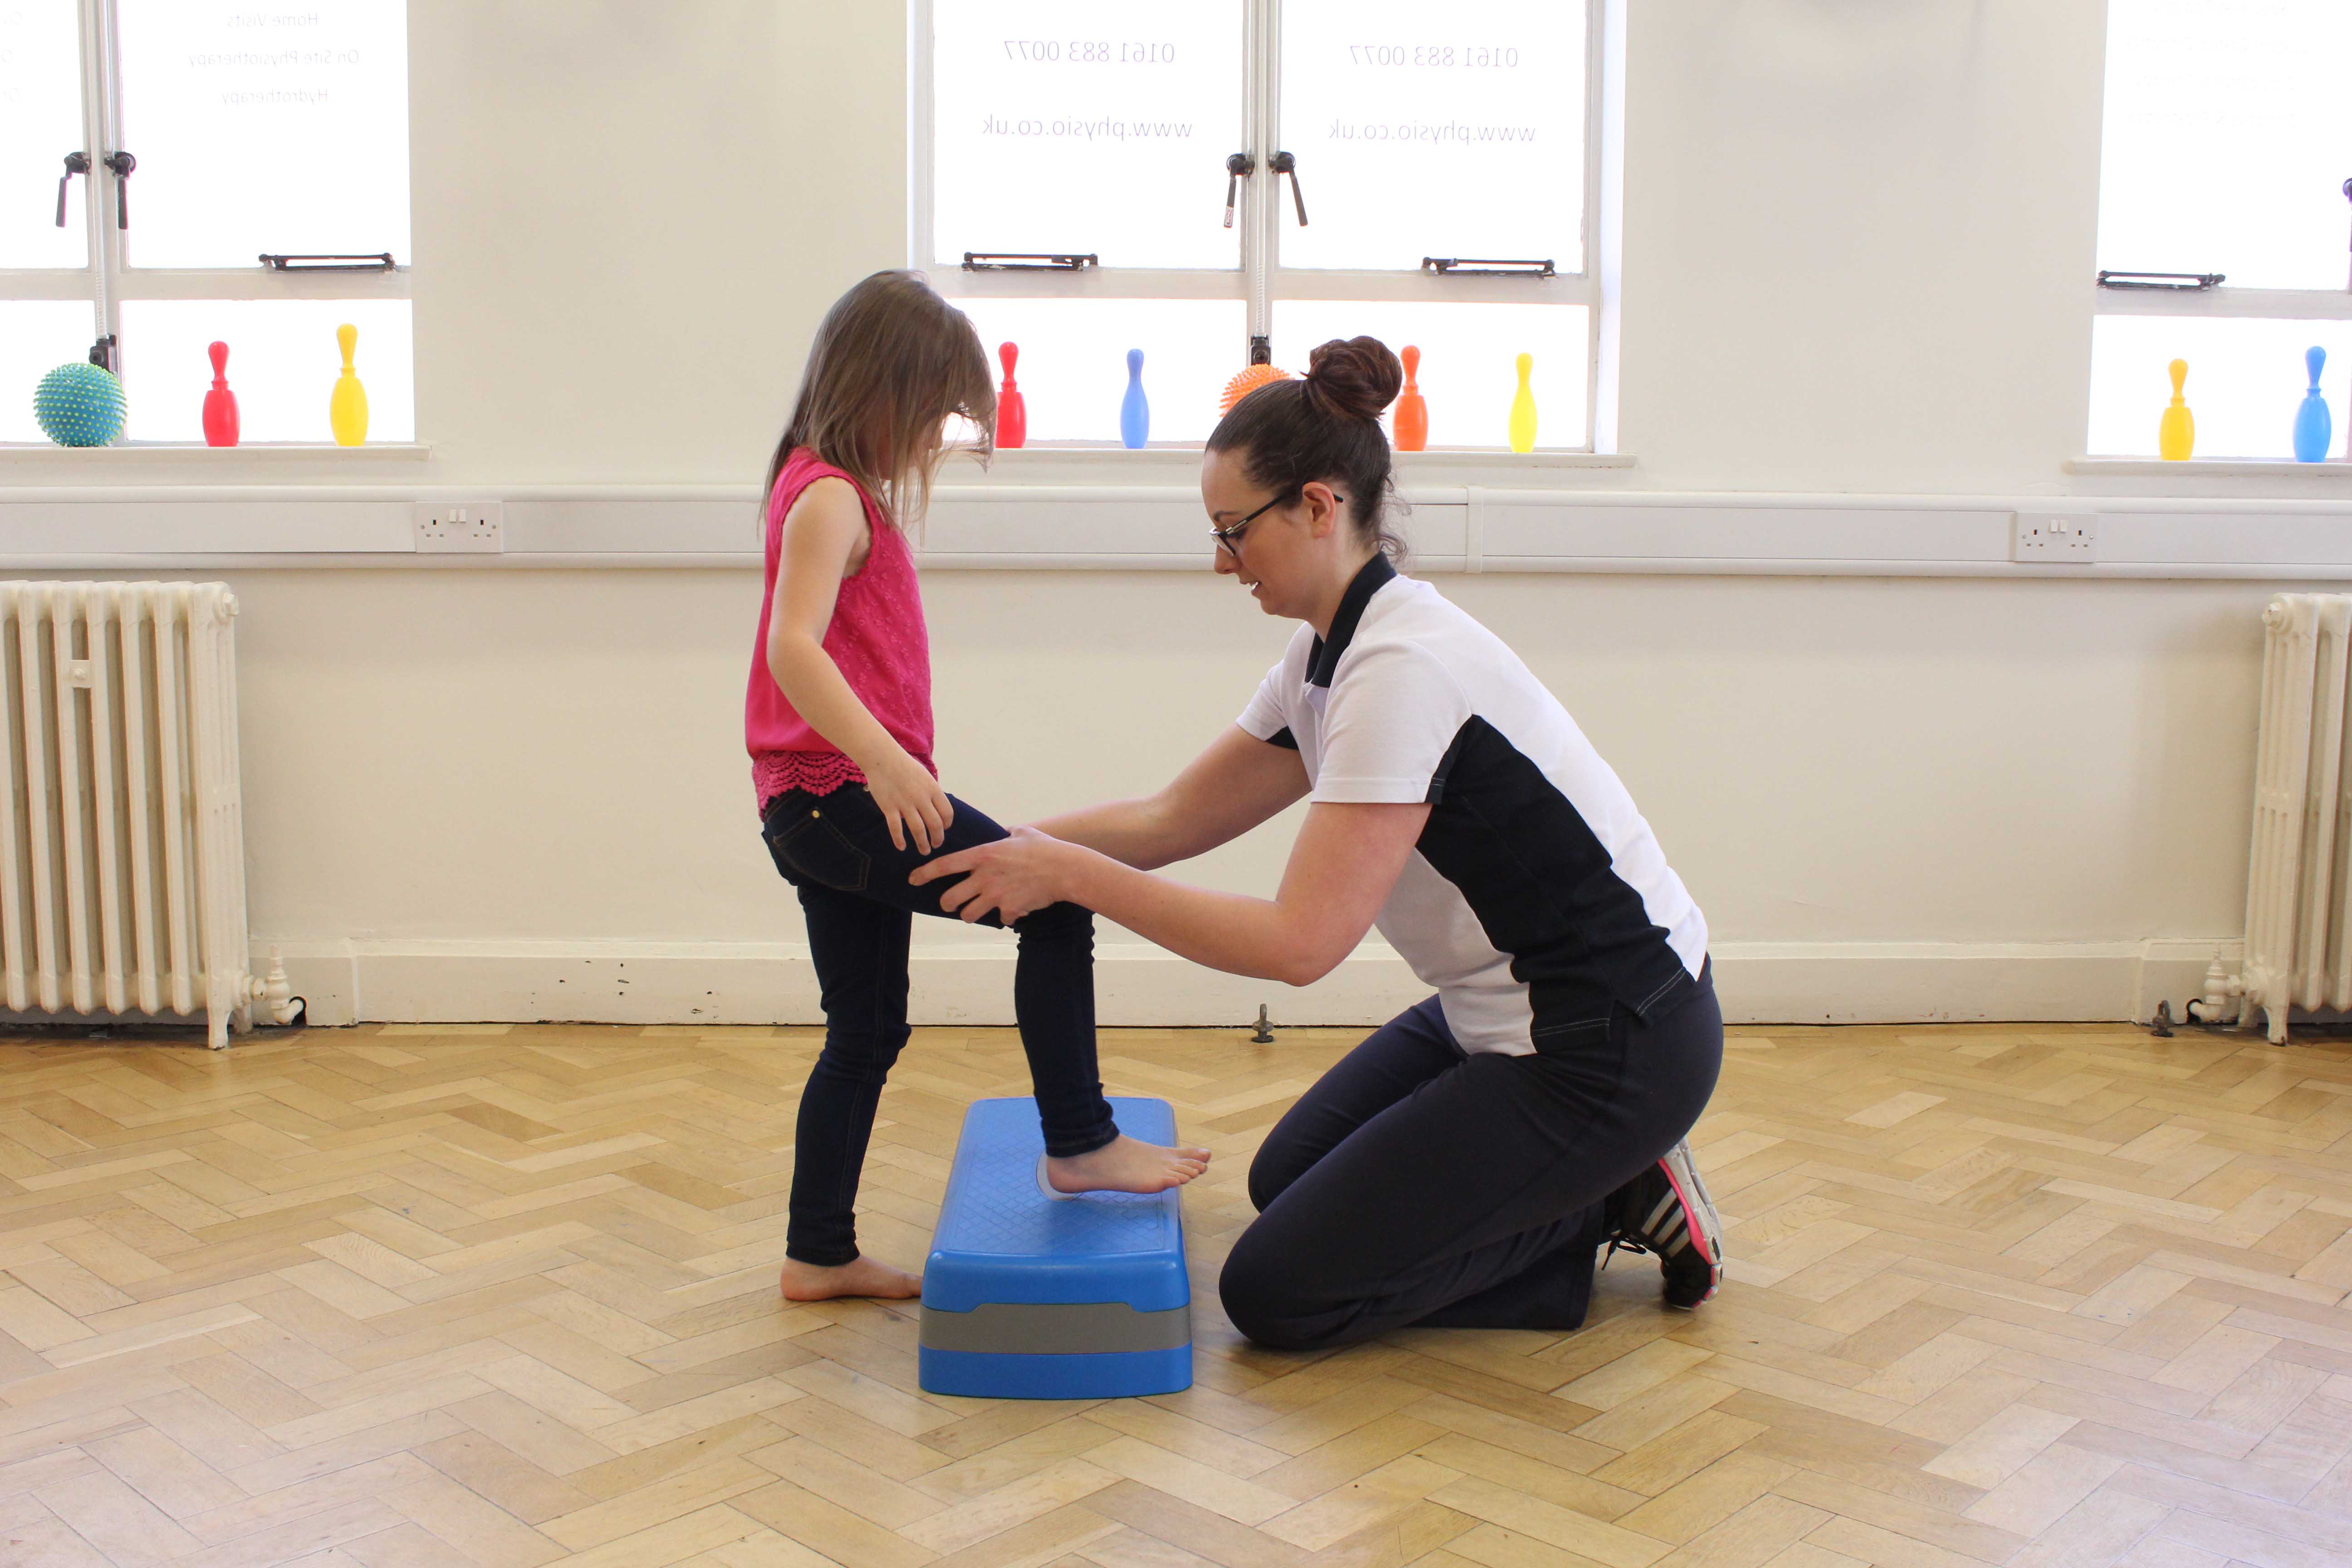 Functional mobility exercises assisted by a paediatric neuro physiotherapist